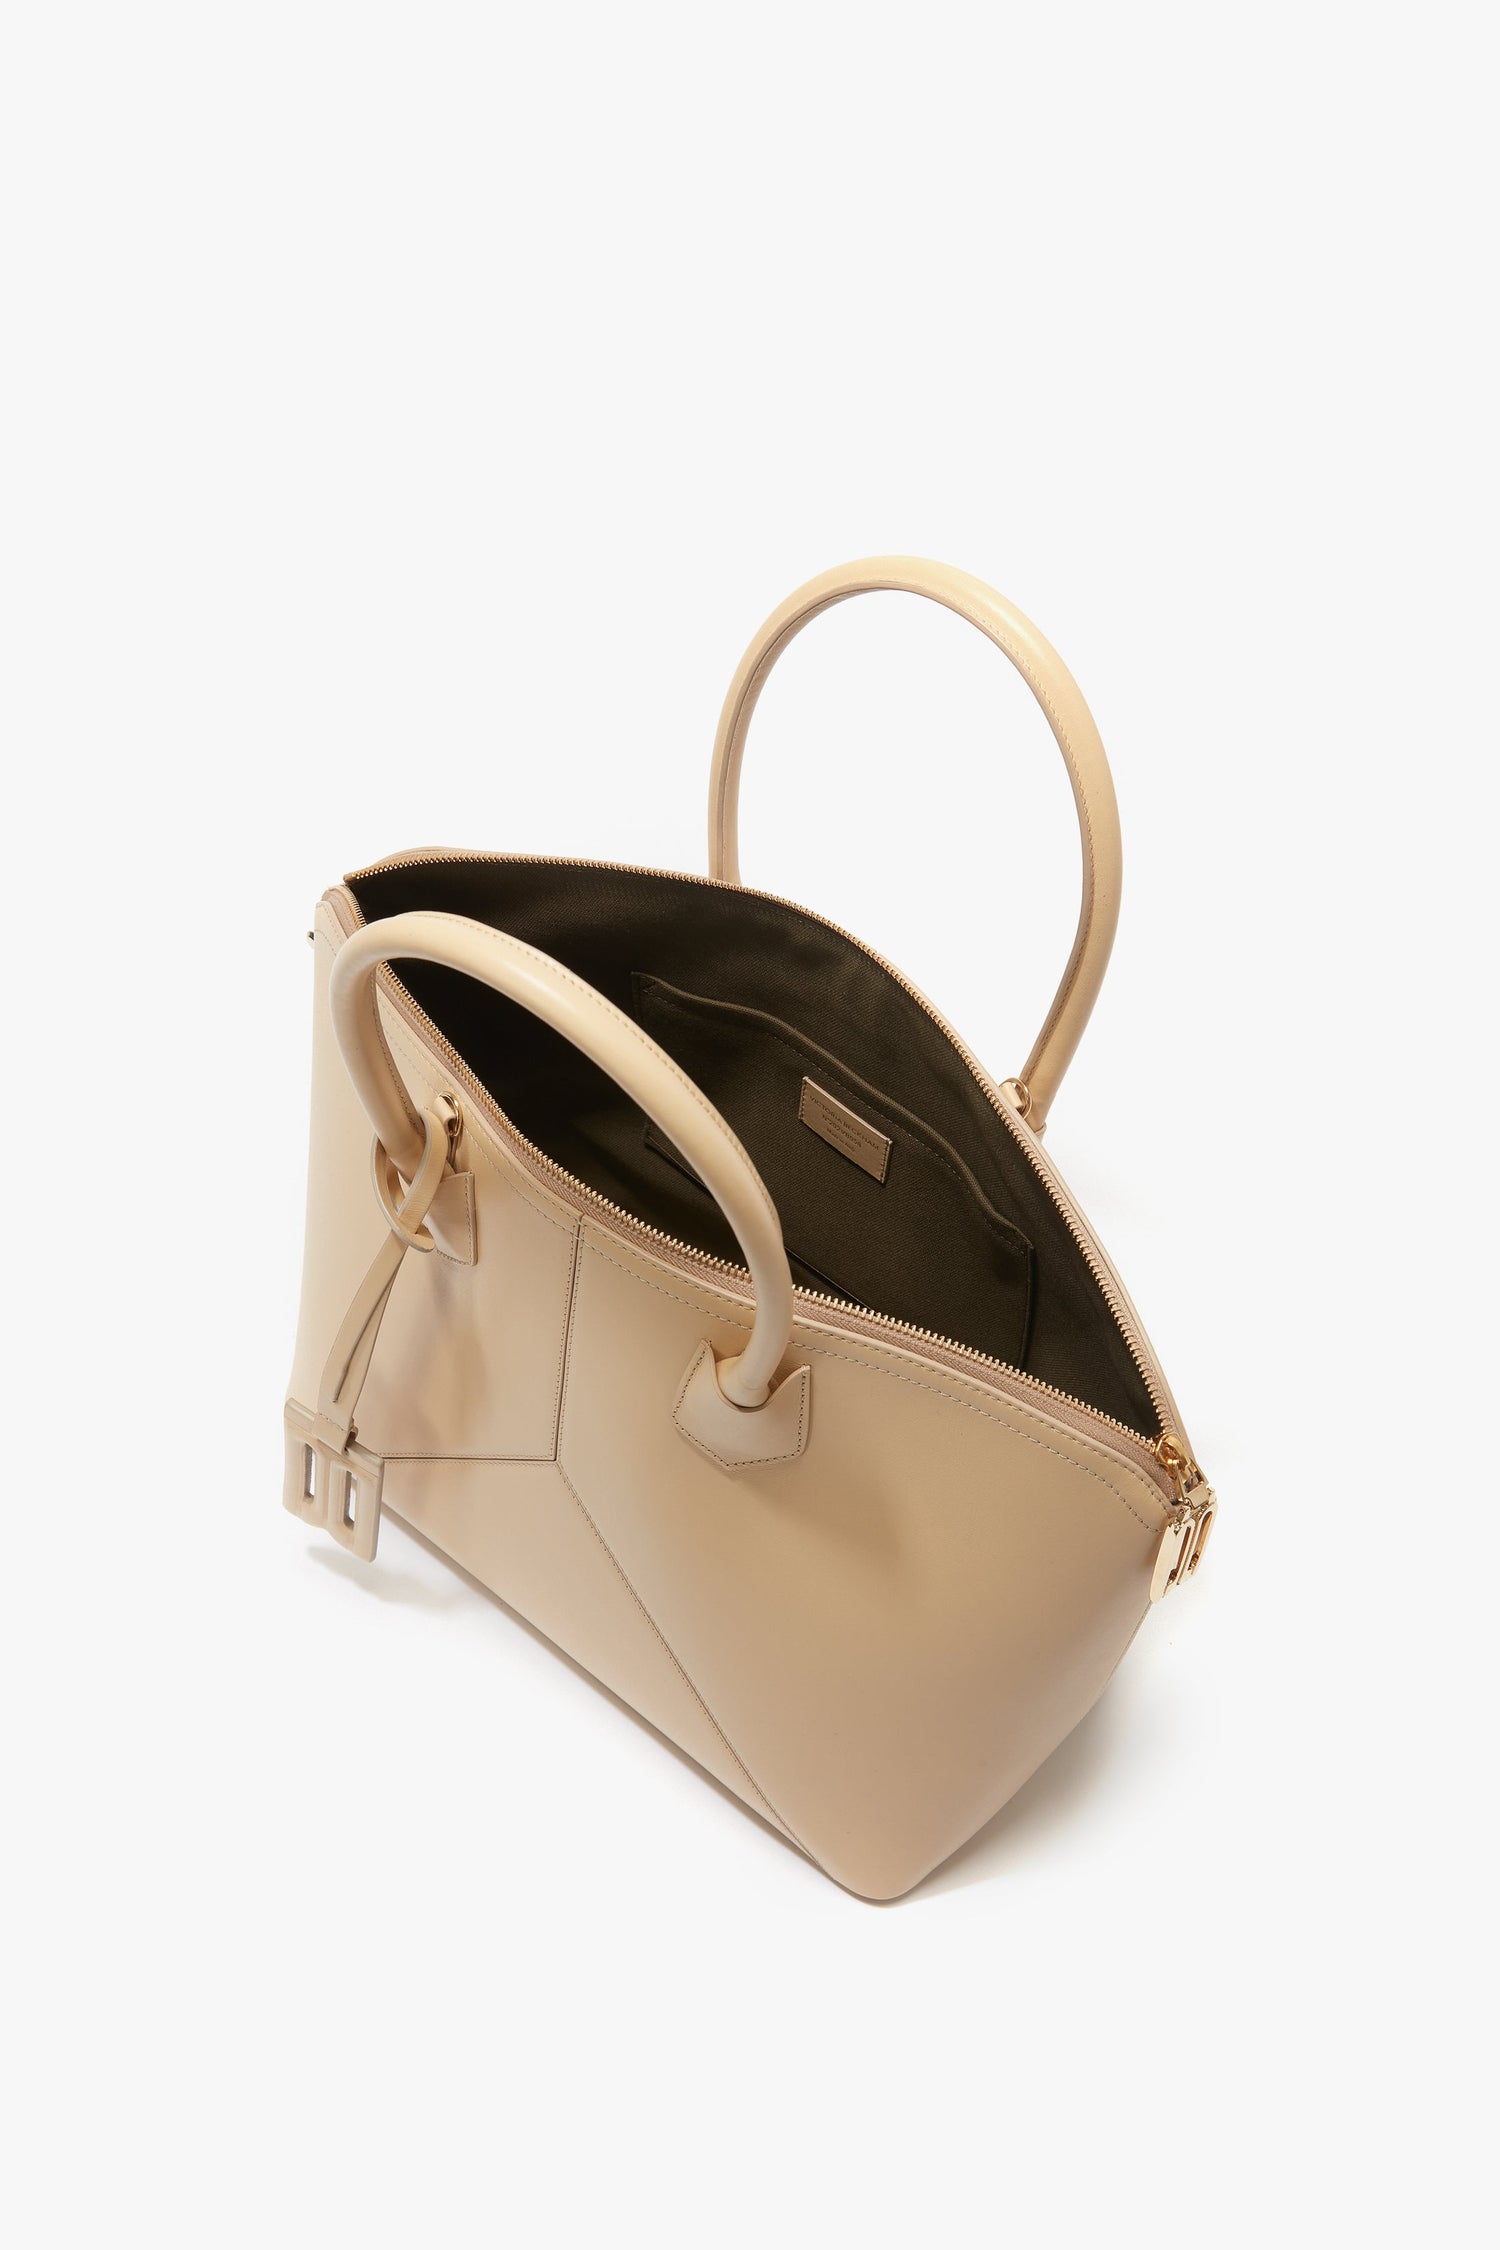 The Victoria Beckham Victoria Bag In Sesame Leather is a beige leather handbag with an open zippered top, two handles, leather panels, an interior pocket, and a small buckle detail on one side.